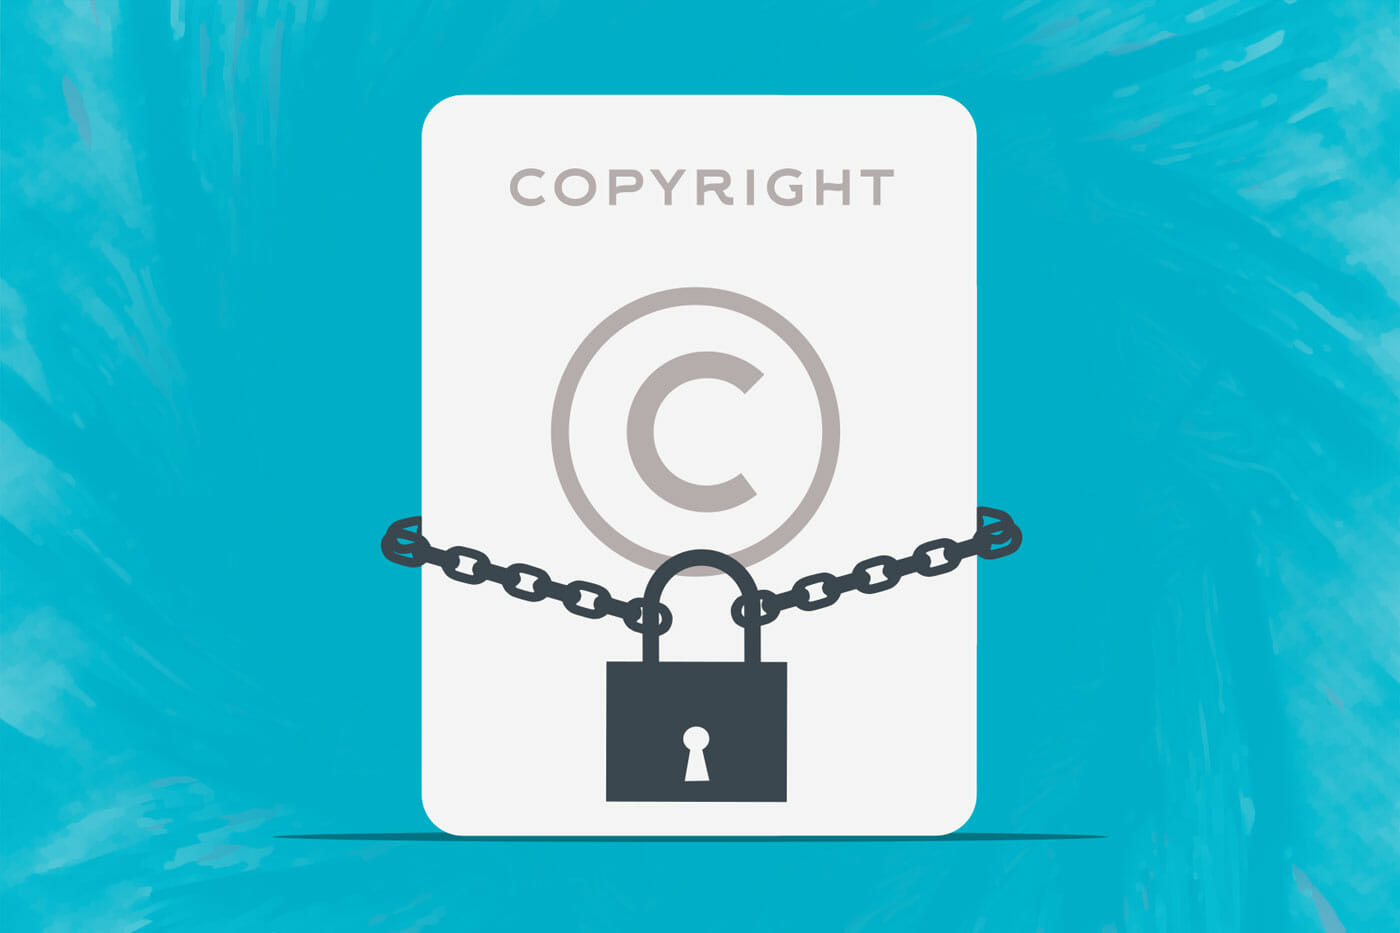 Copyright laws for music